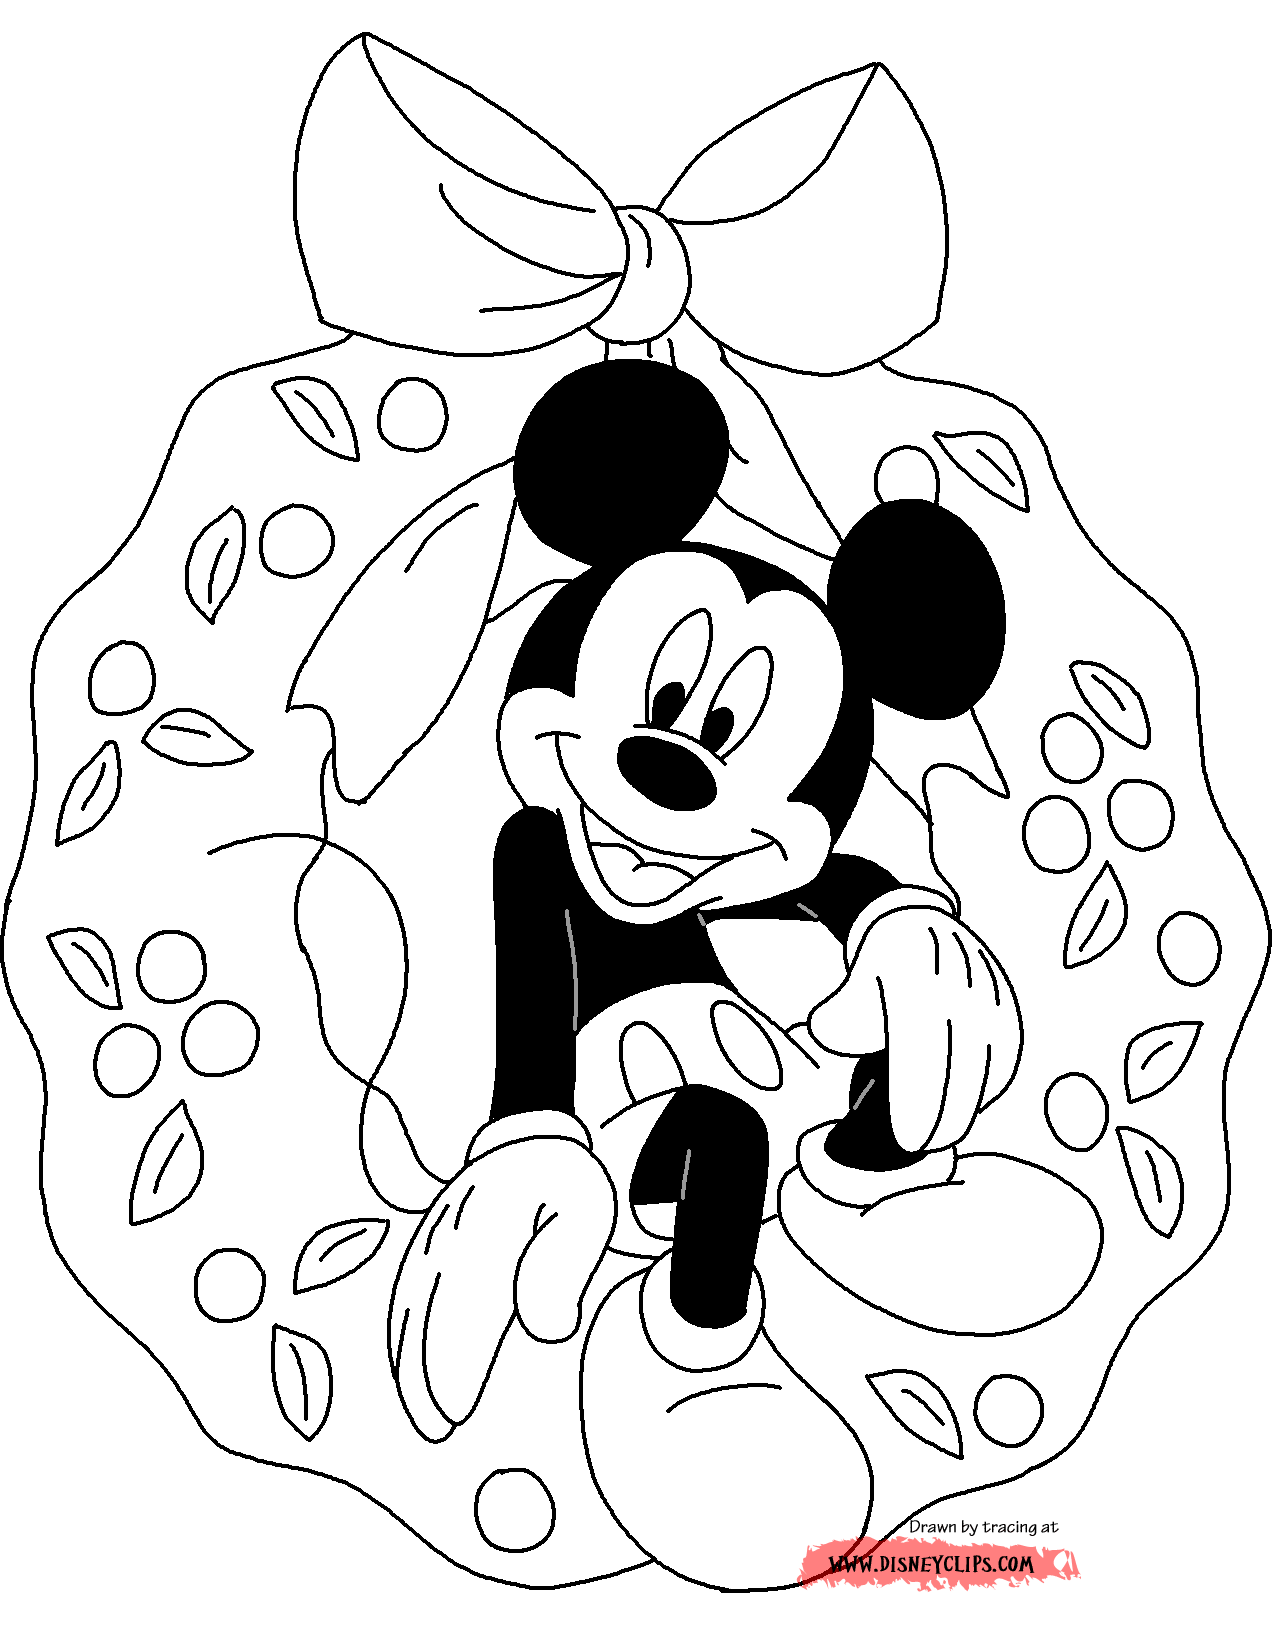 Download Disney Christmas Coloring Pages 2 | Disneyclips.com